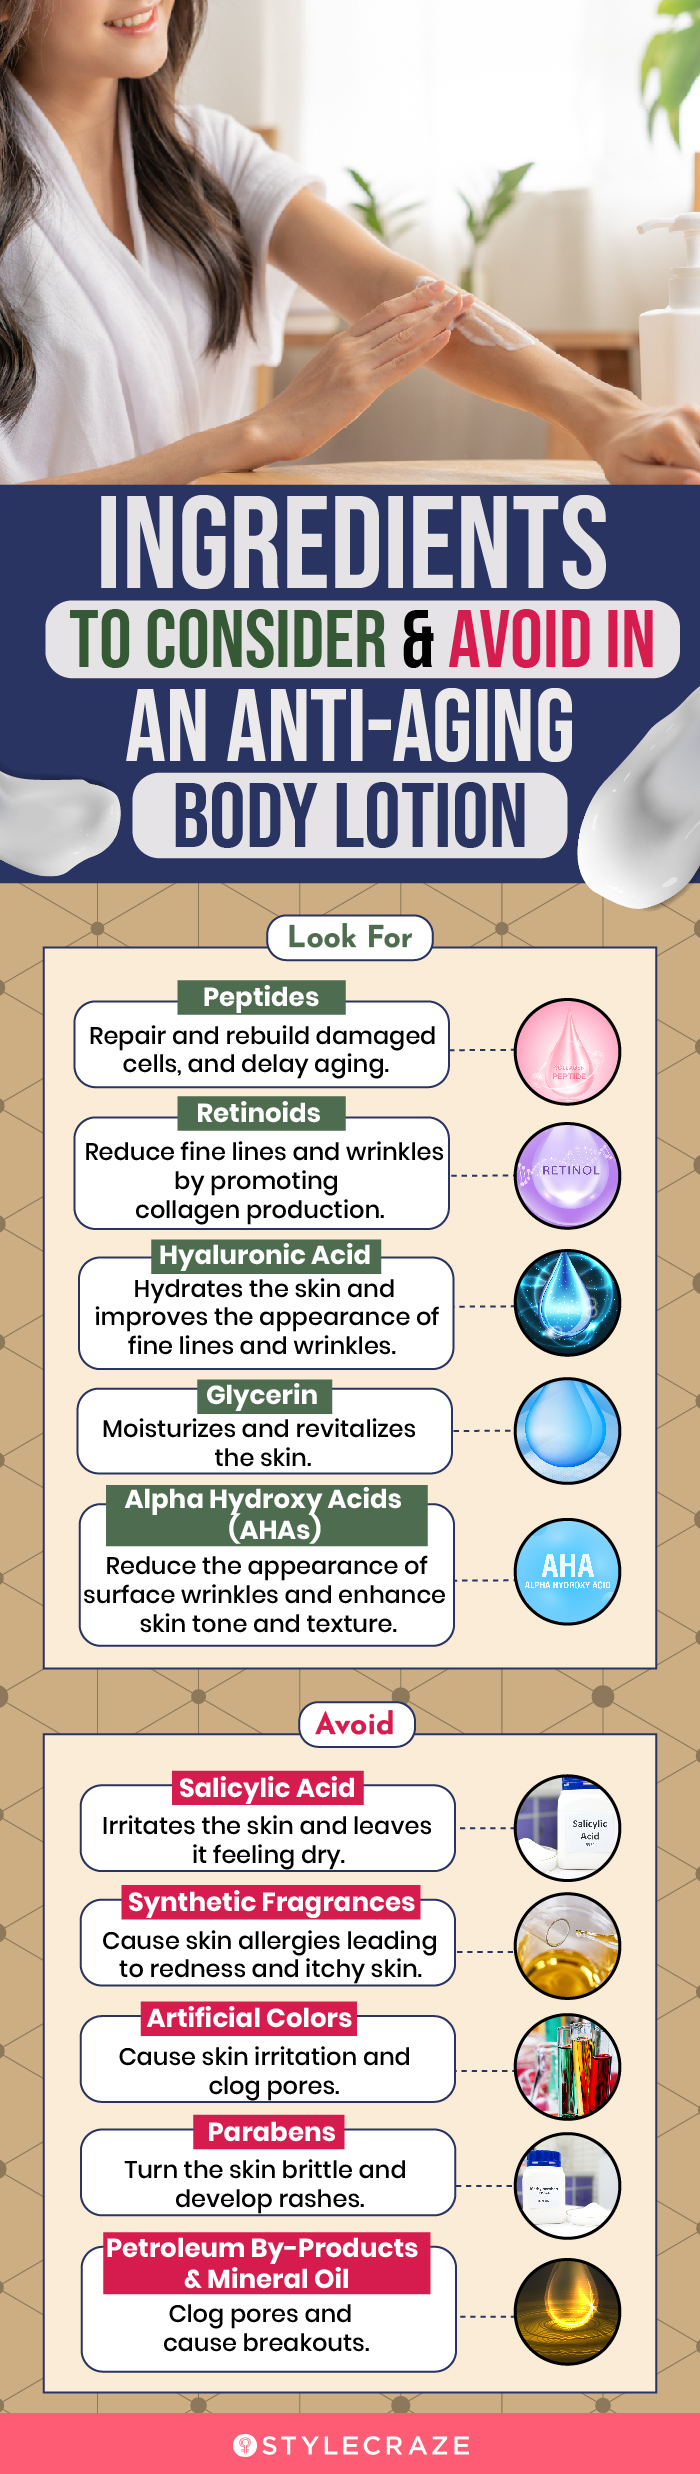 Ingredients To Consider & Avoid In An Anti Aging Body Lotion (infographic)